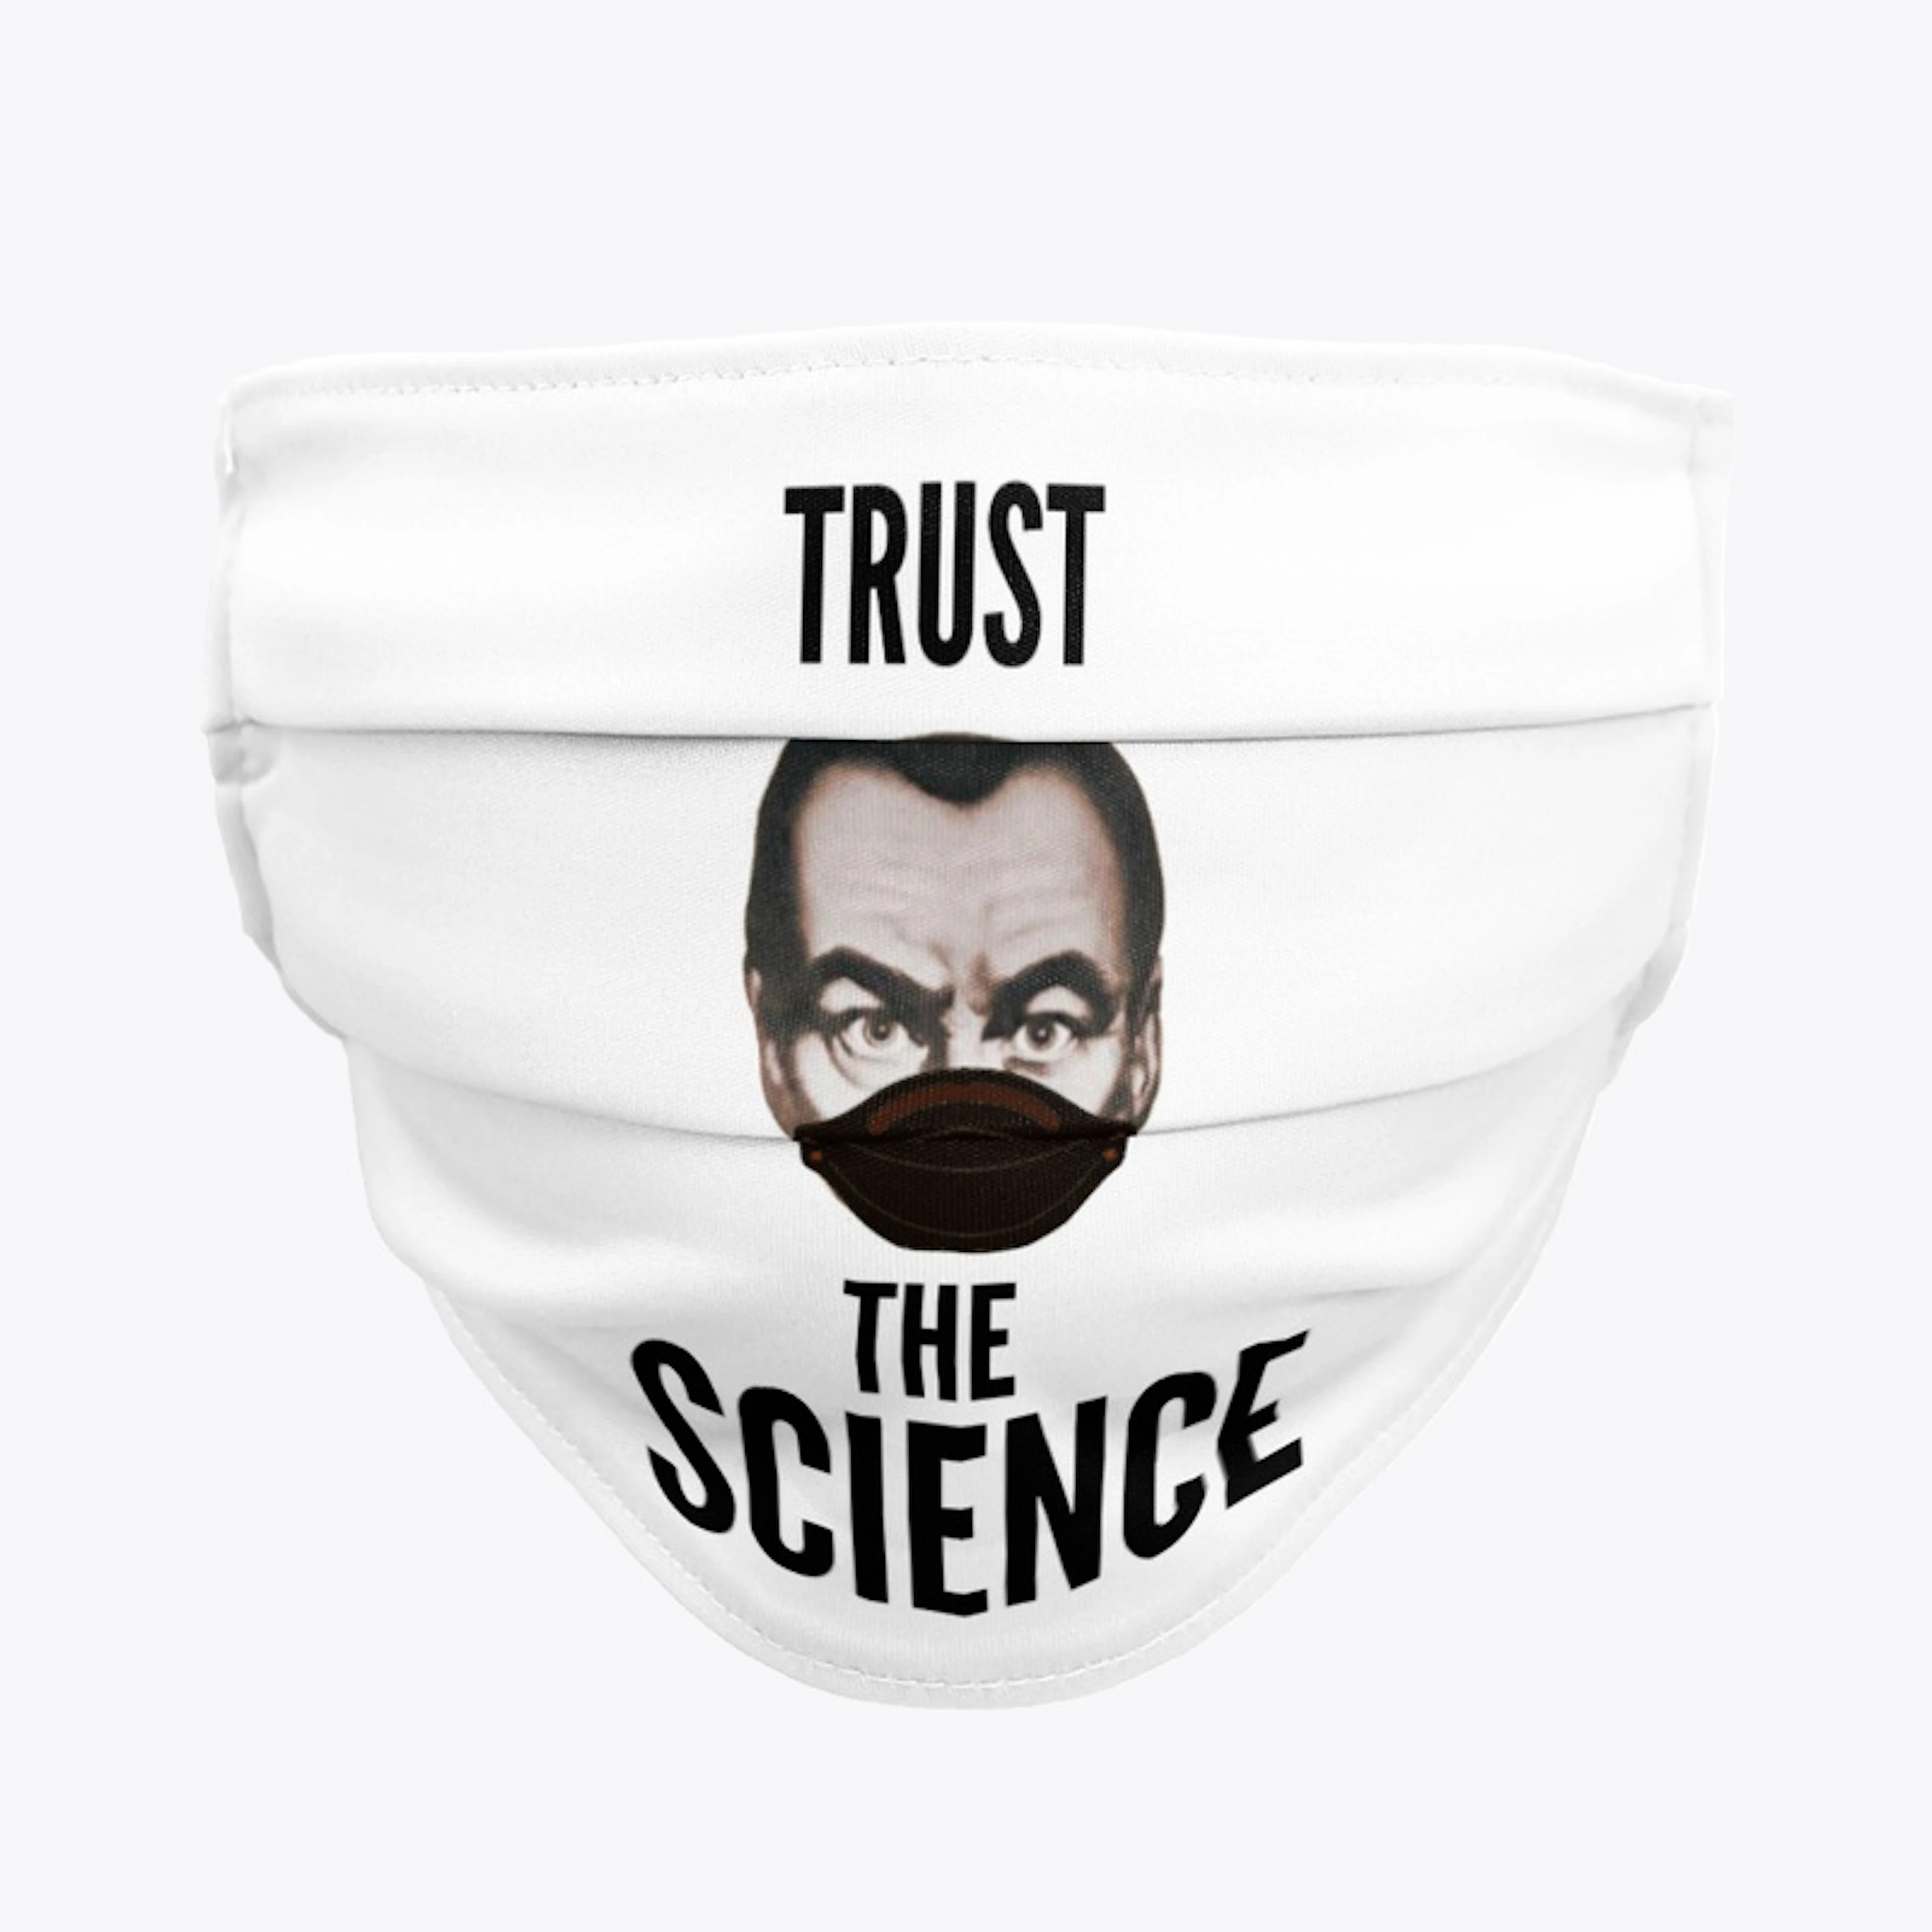 Trust the science